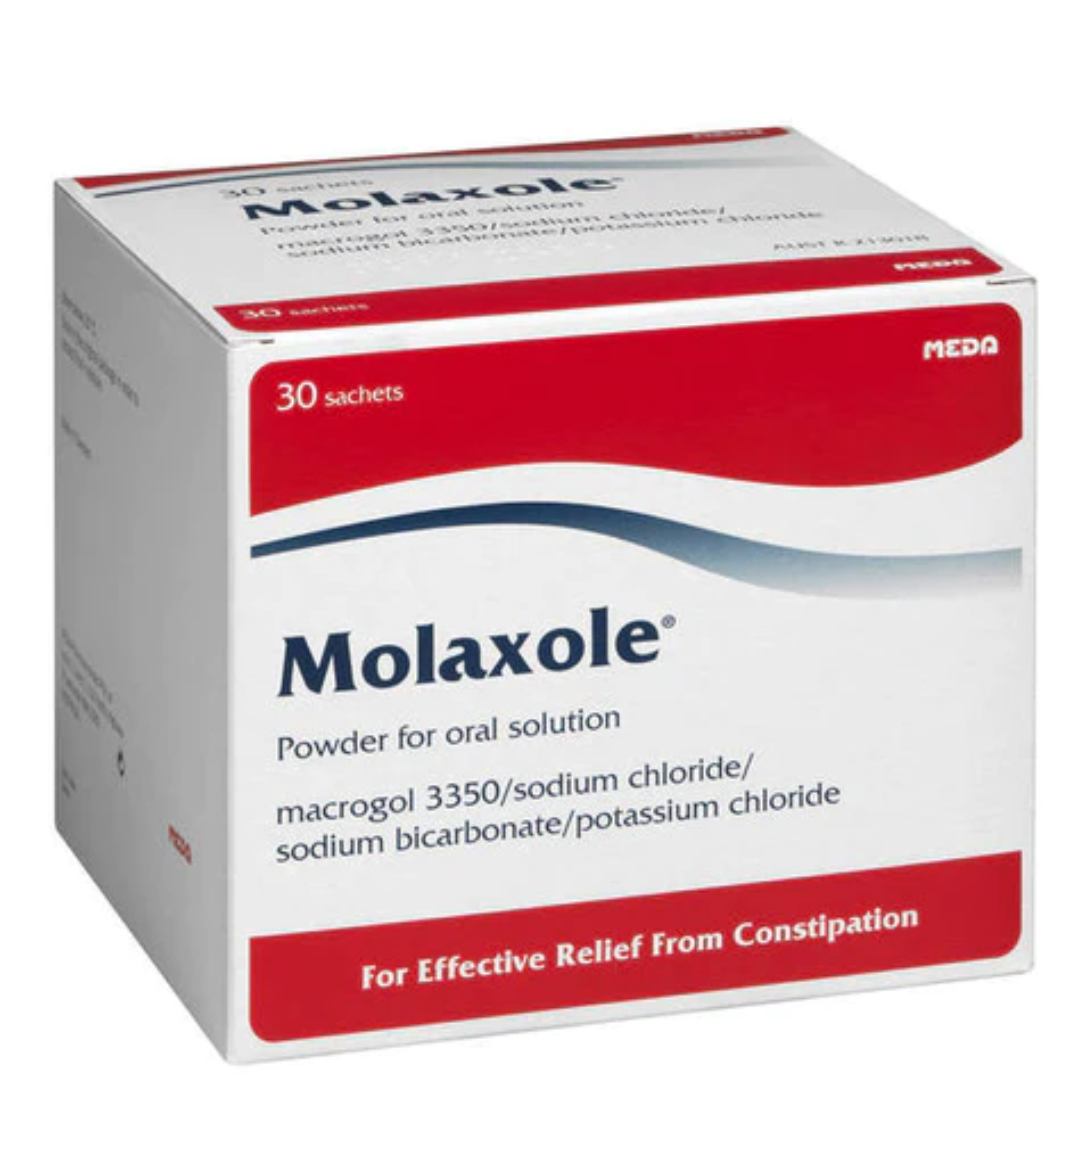 Molaxole Powder for Oral Solution - 30 Sachets